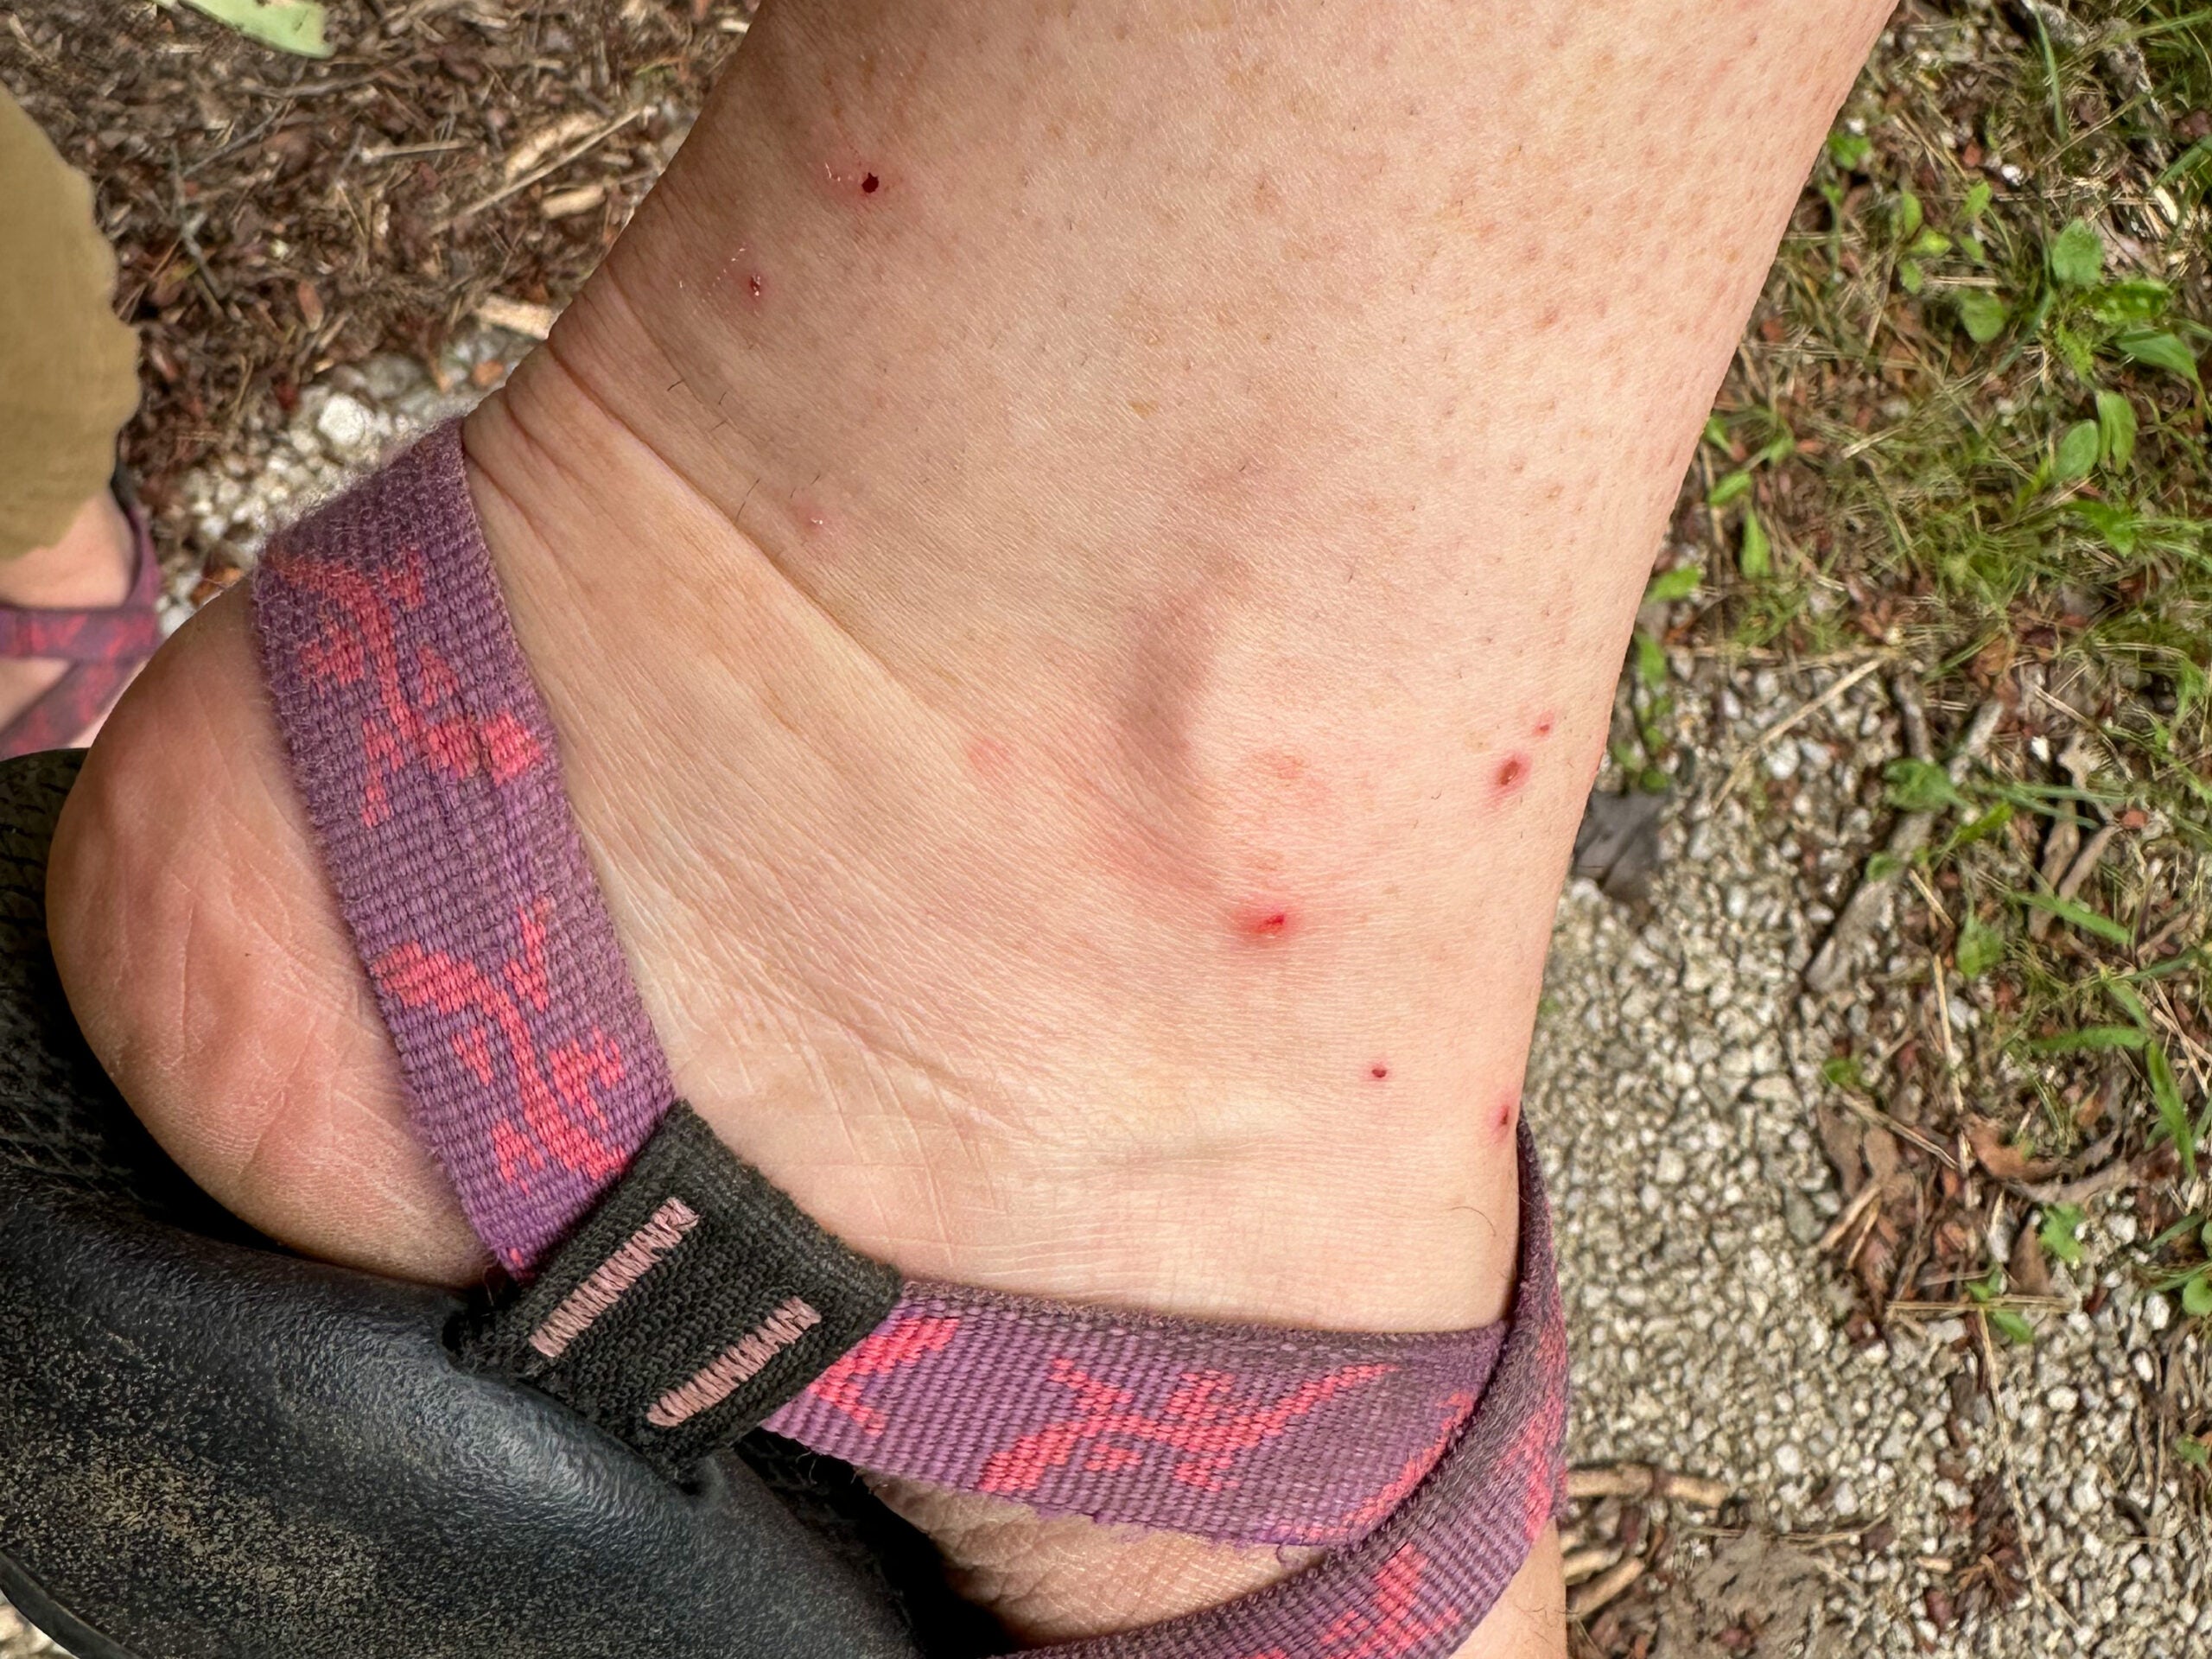 chigger bites around a person's ankle